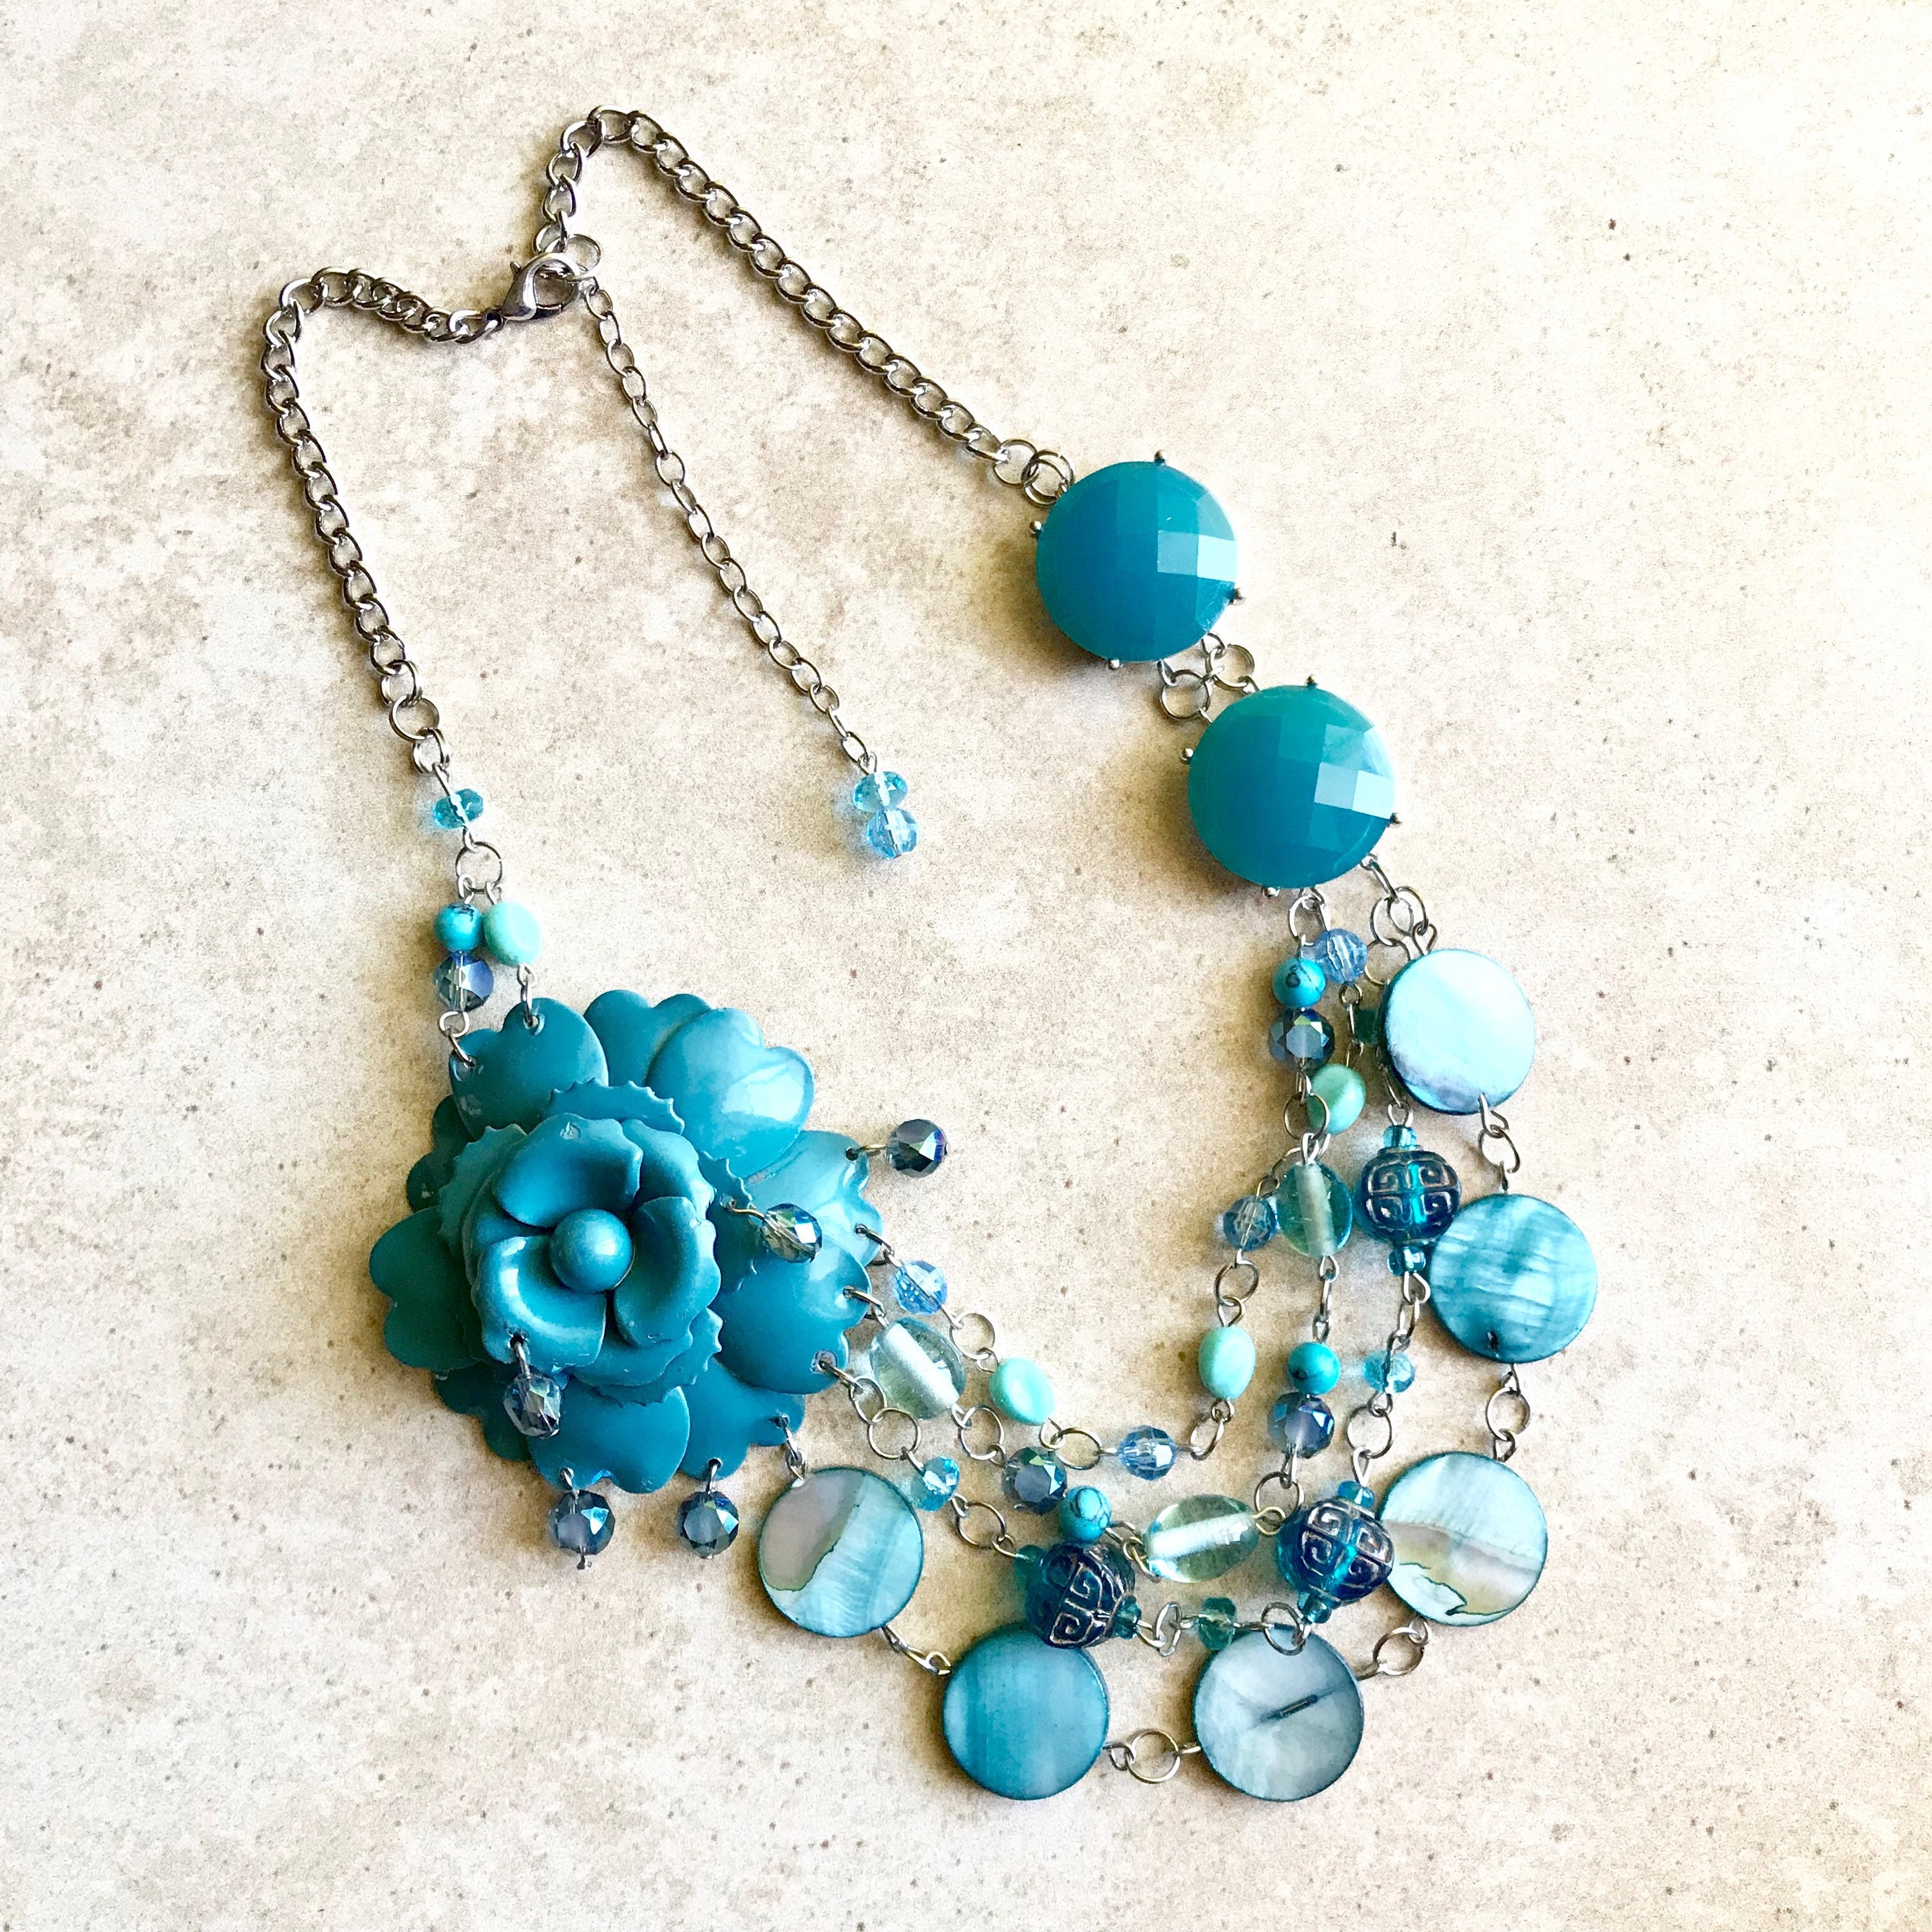 Blue Floral Repurposed Statement Necklace // Handmade Recycled Broach ...